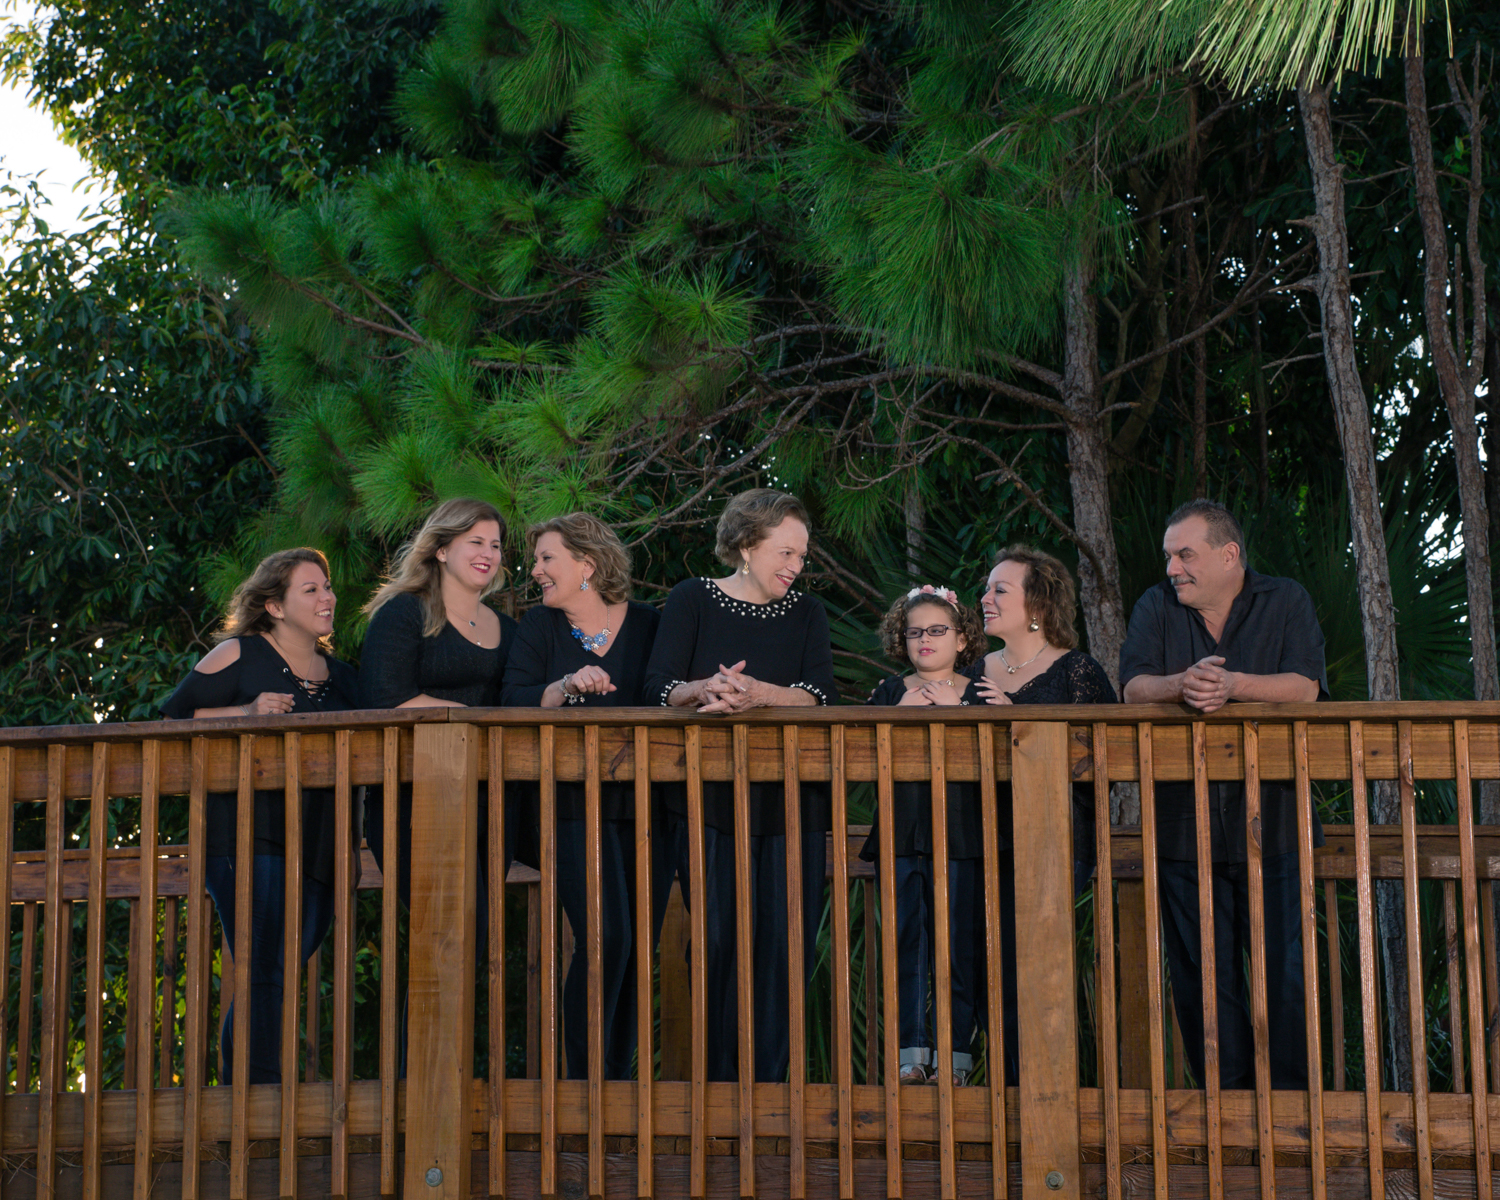 Award-winning family photography in South Florida.